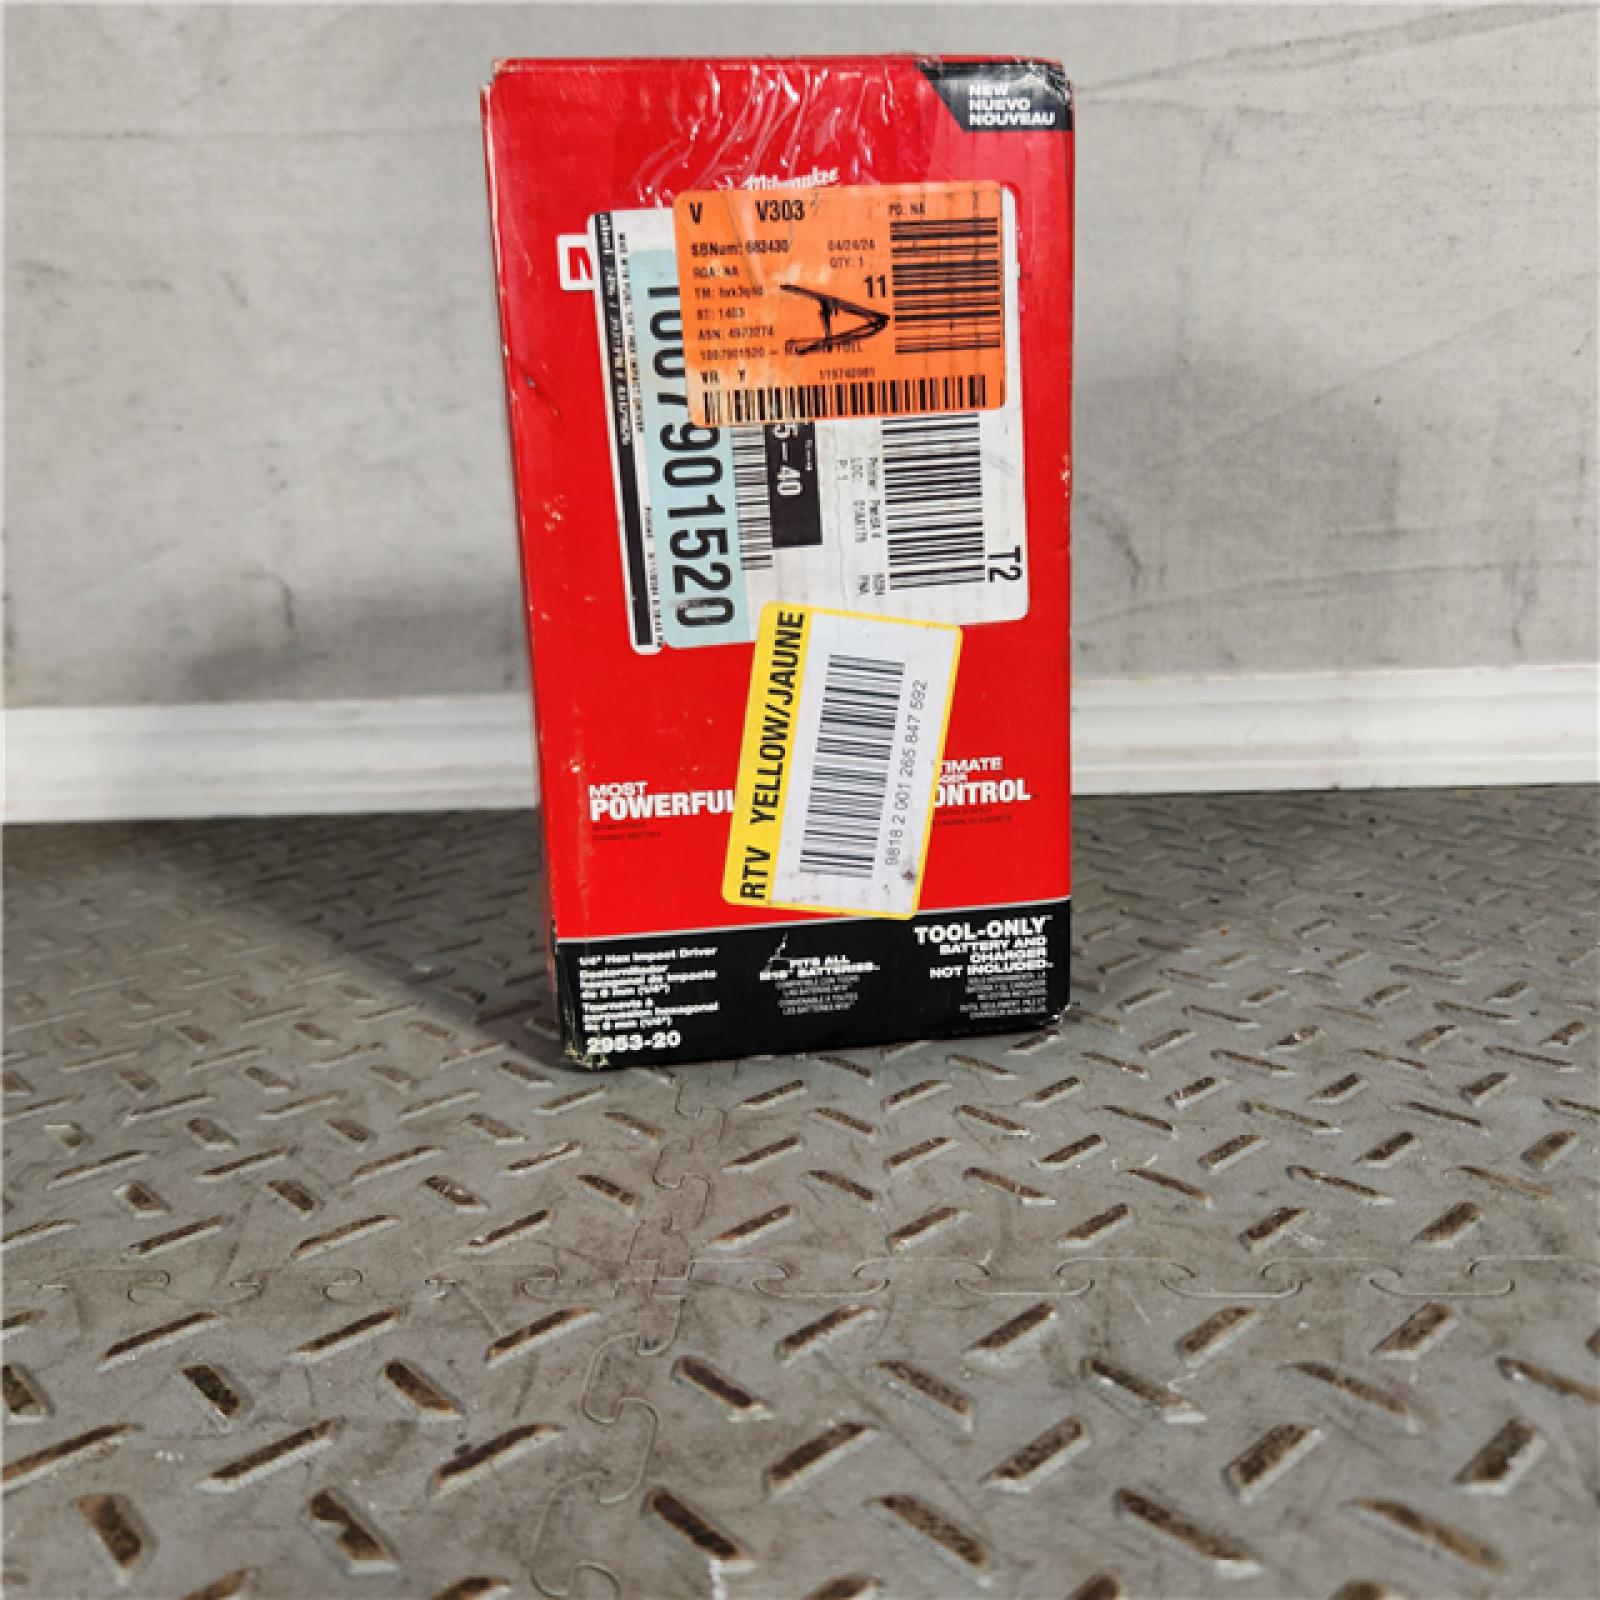 Houston location- AS-IS Milwaukee 2953-20 M18 FUEL 1/4 Hex Impact Driver (Bare Tool Only)